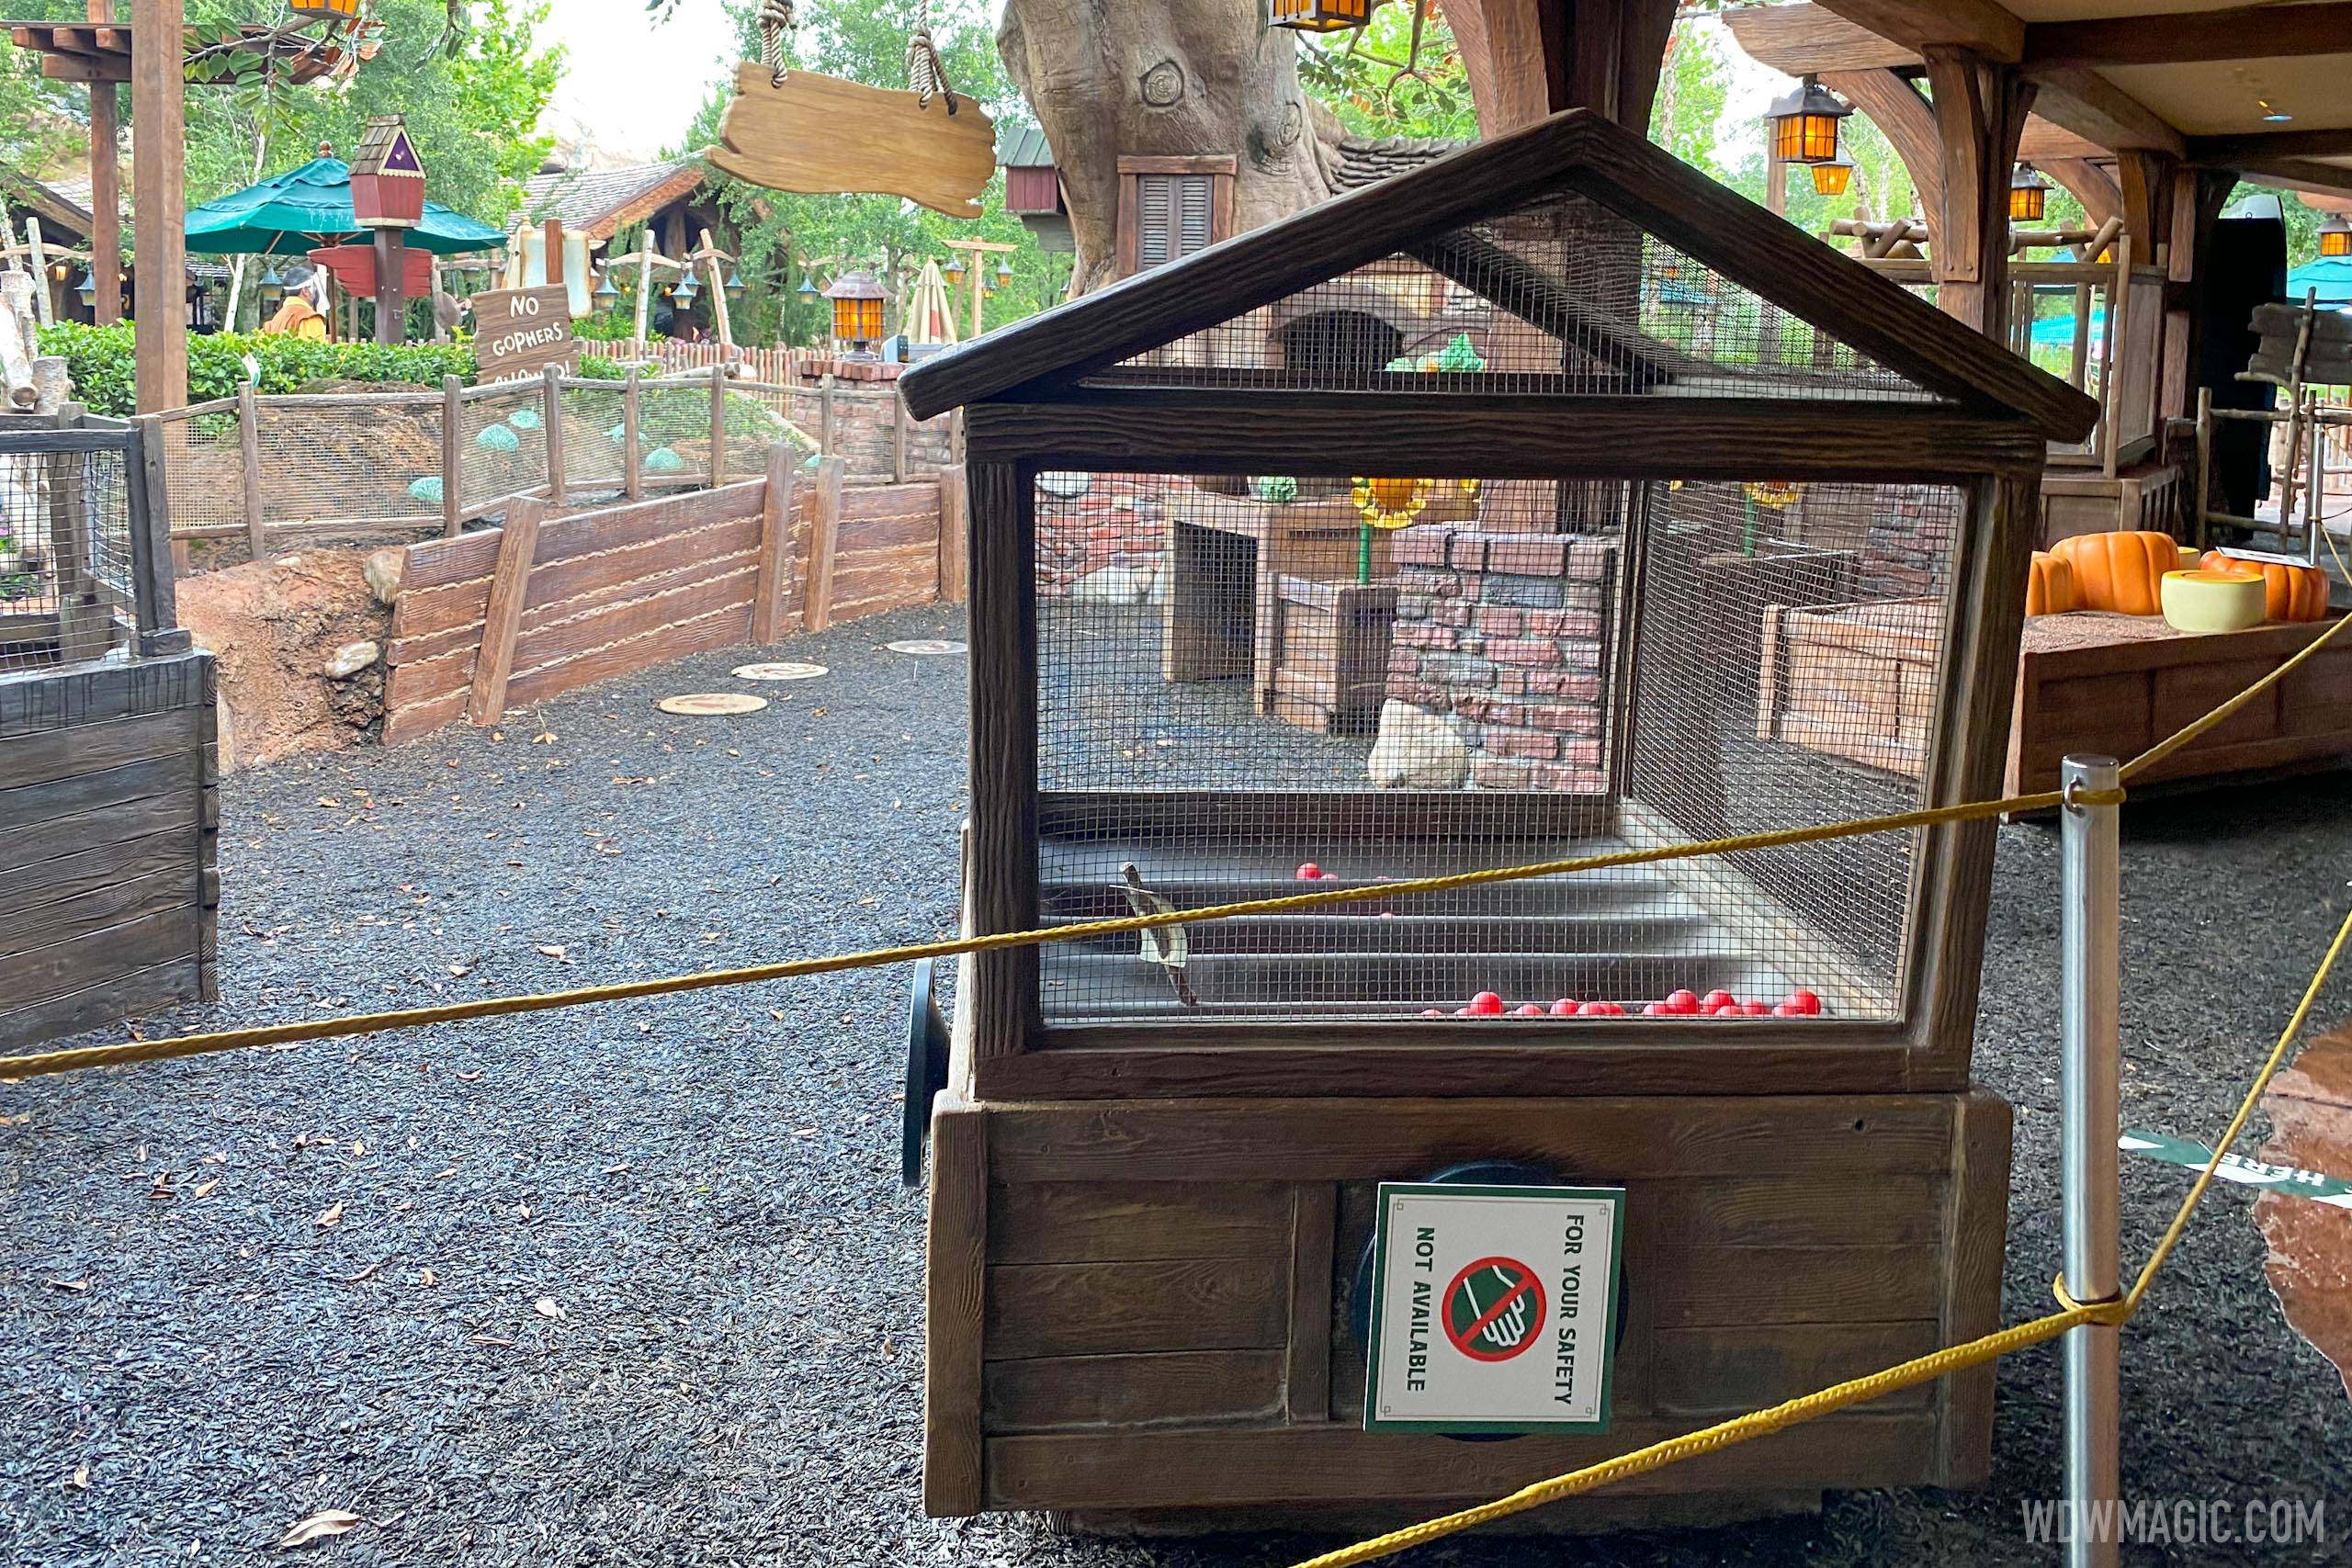 Interactive areas roped off in Pooh queue 